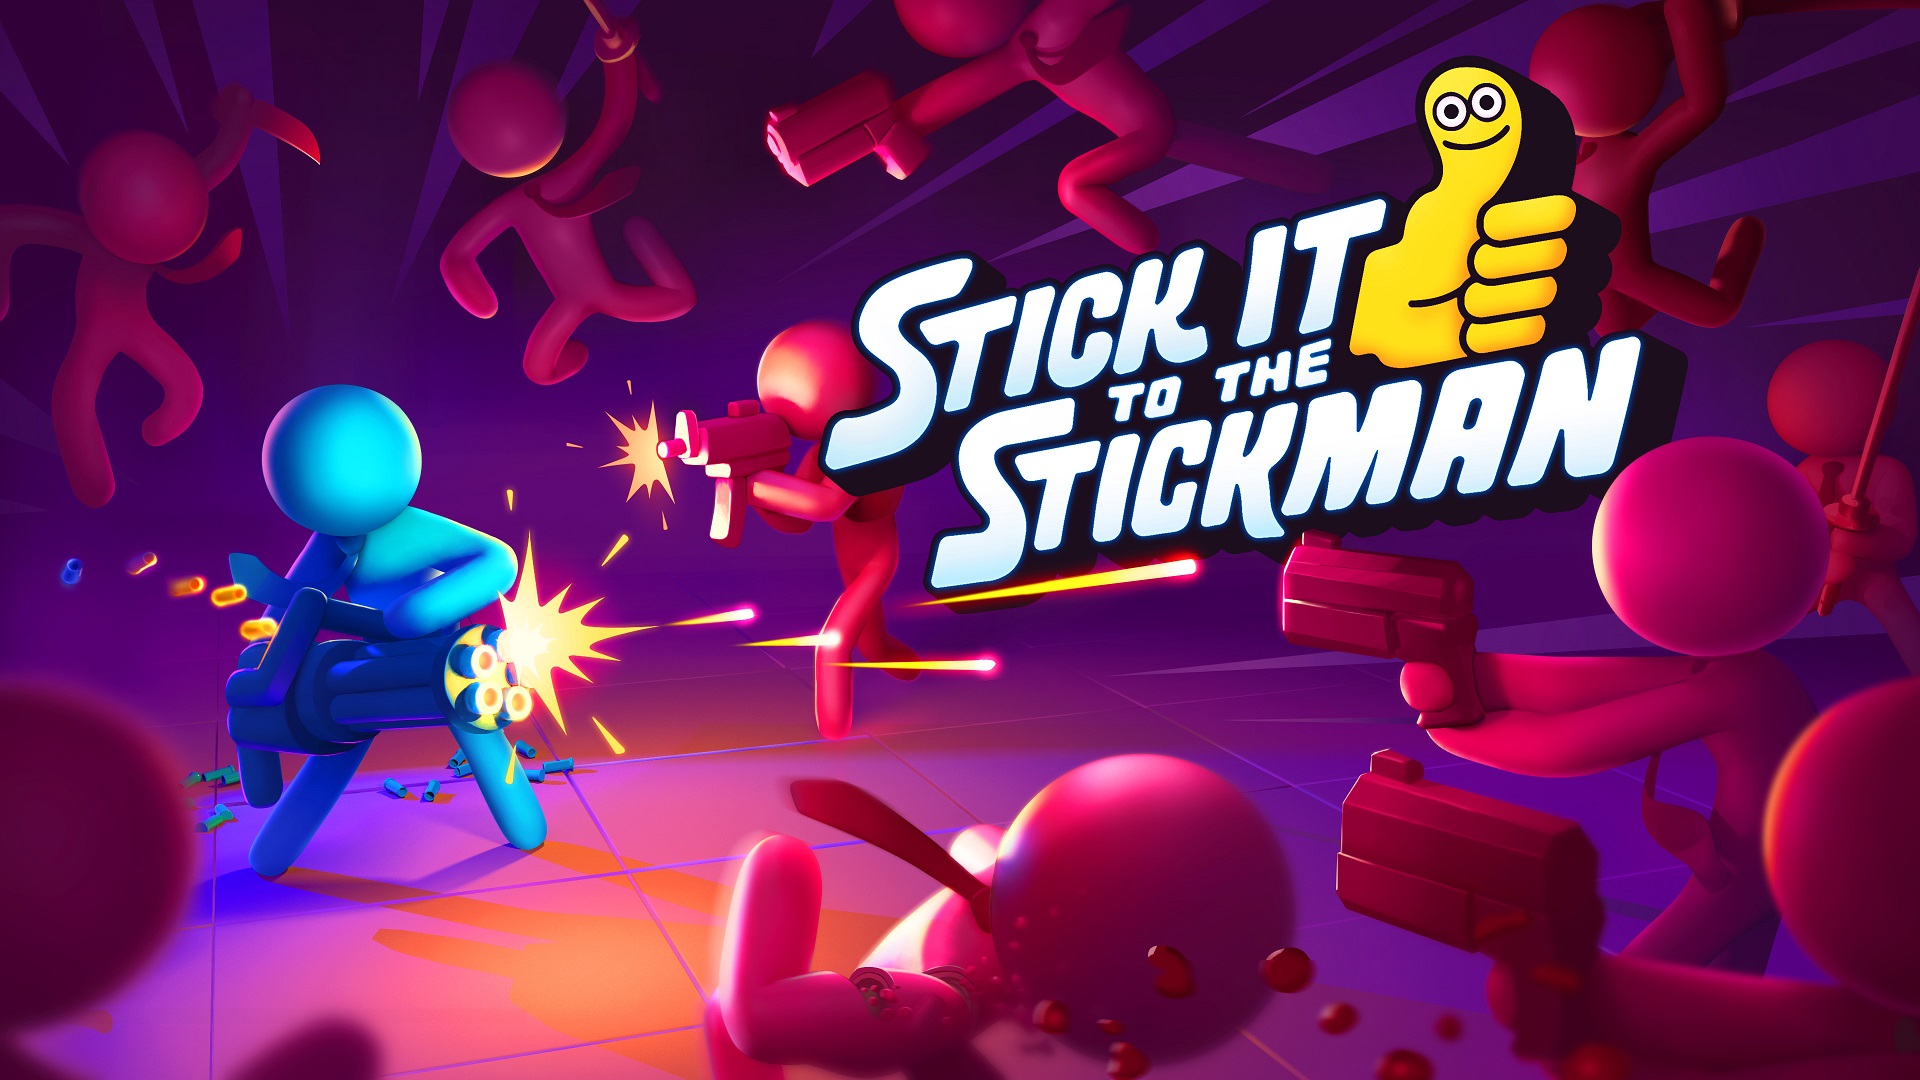 New roguelike beat ’em up Stick it to the Stickman announced